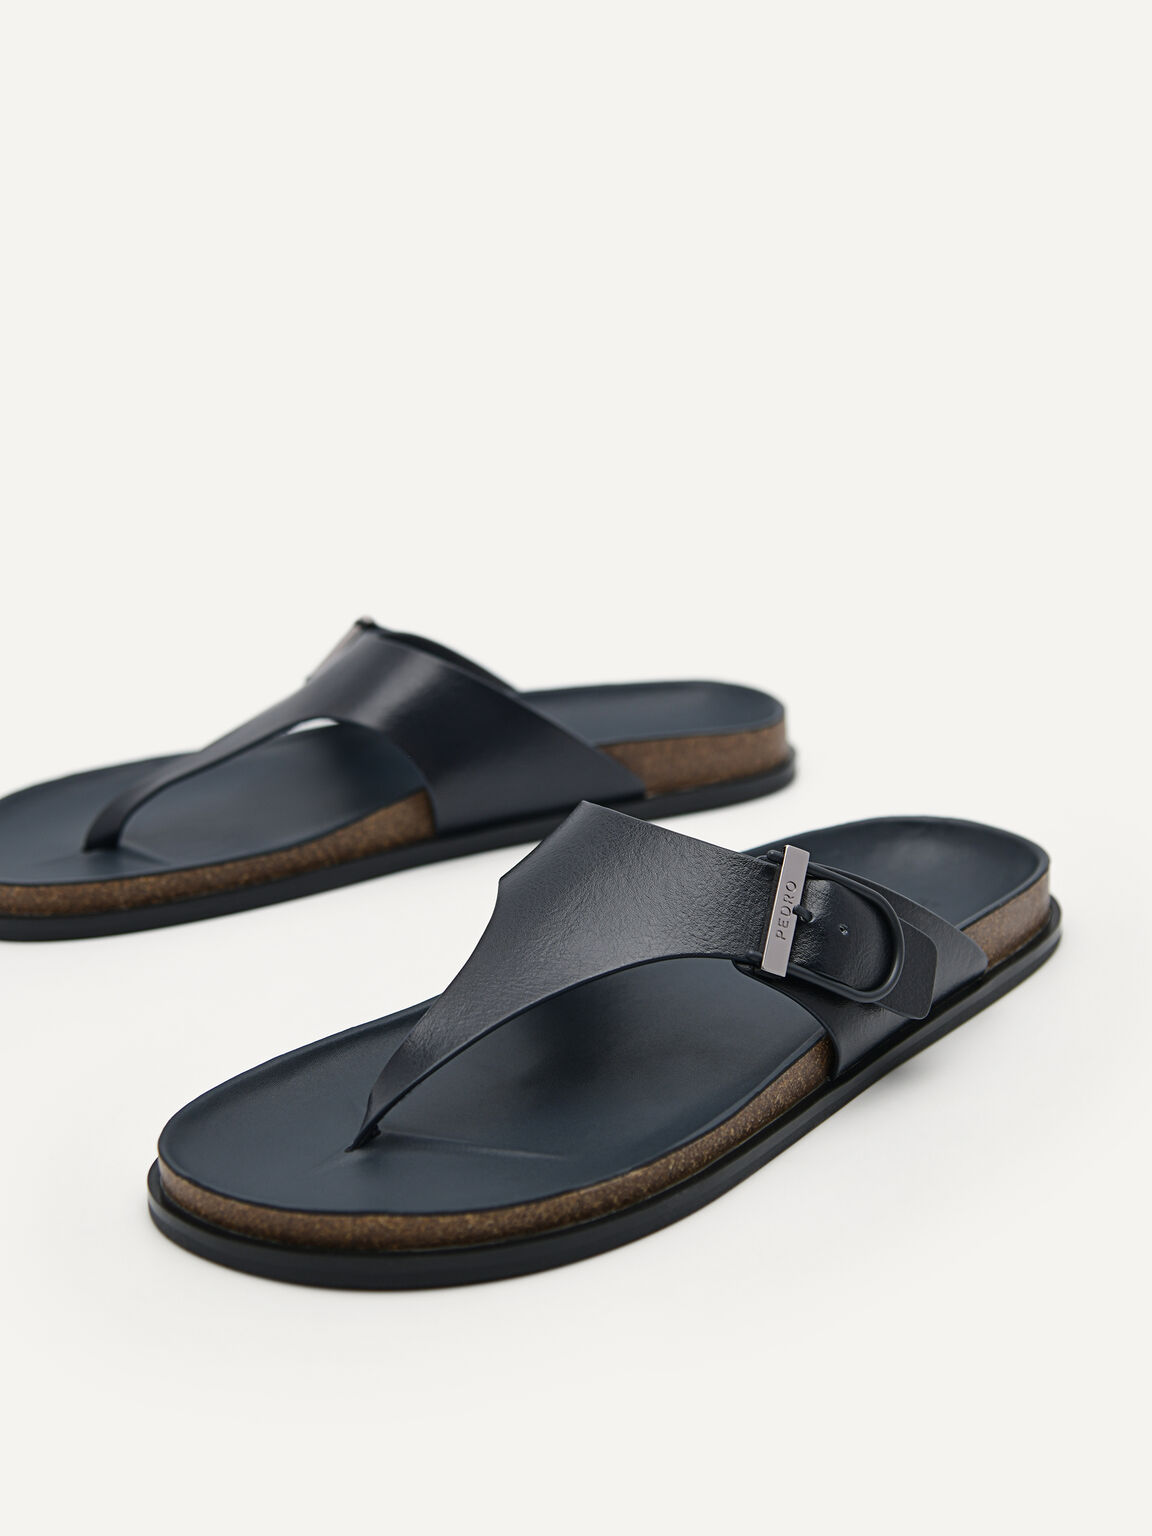 Synthetic Leather Thong Sandals, Navy